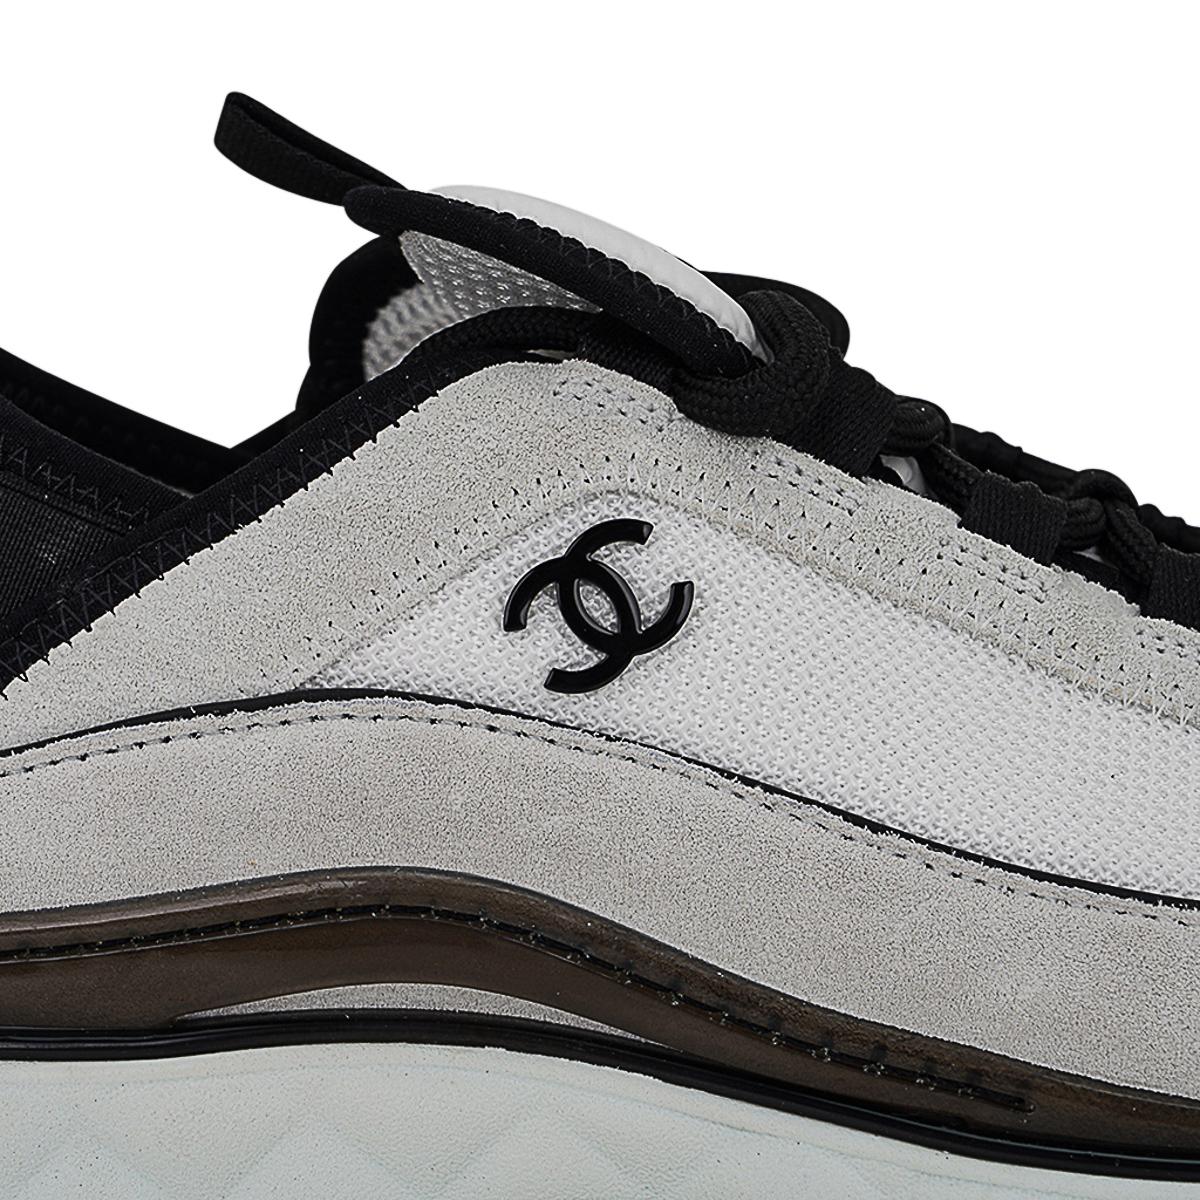 Mightychic offers a pair of Chanel 2023 Velvet Calfskin Mixed Fibers sneakers featured in Black and White.
Sneaker is fabric with suede and calfskin with black shoelaces.
Black CC logo on side.
CHANEL at rear above heel.
White quilted leather all